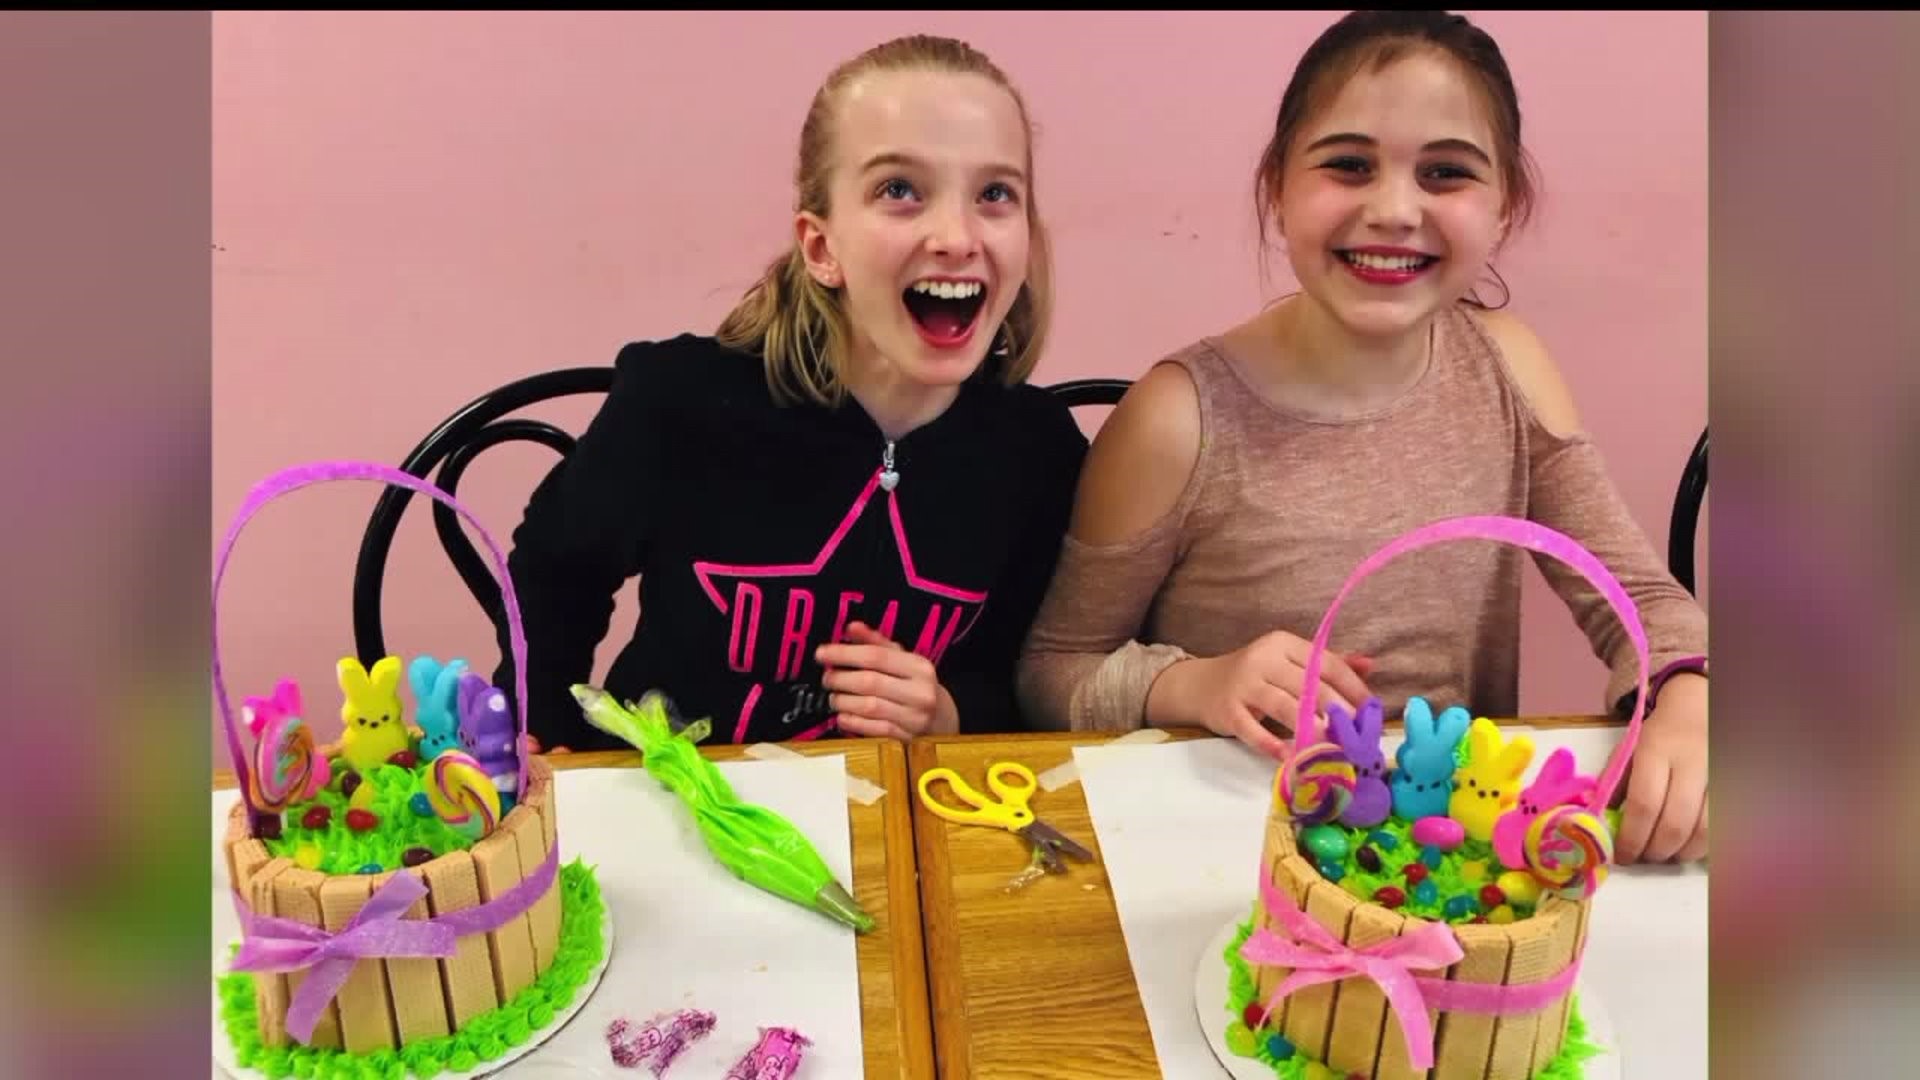 Camping Cake Decorating Ideas for Kids : Decorating Cakes - YouTube